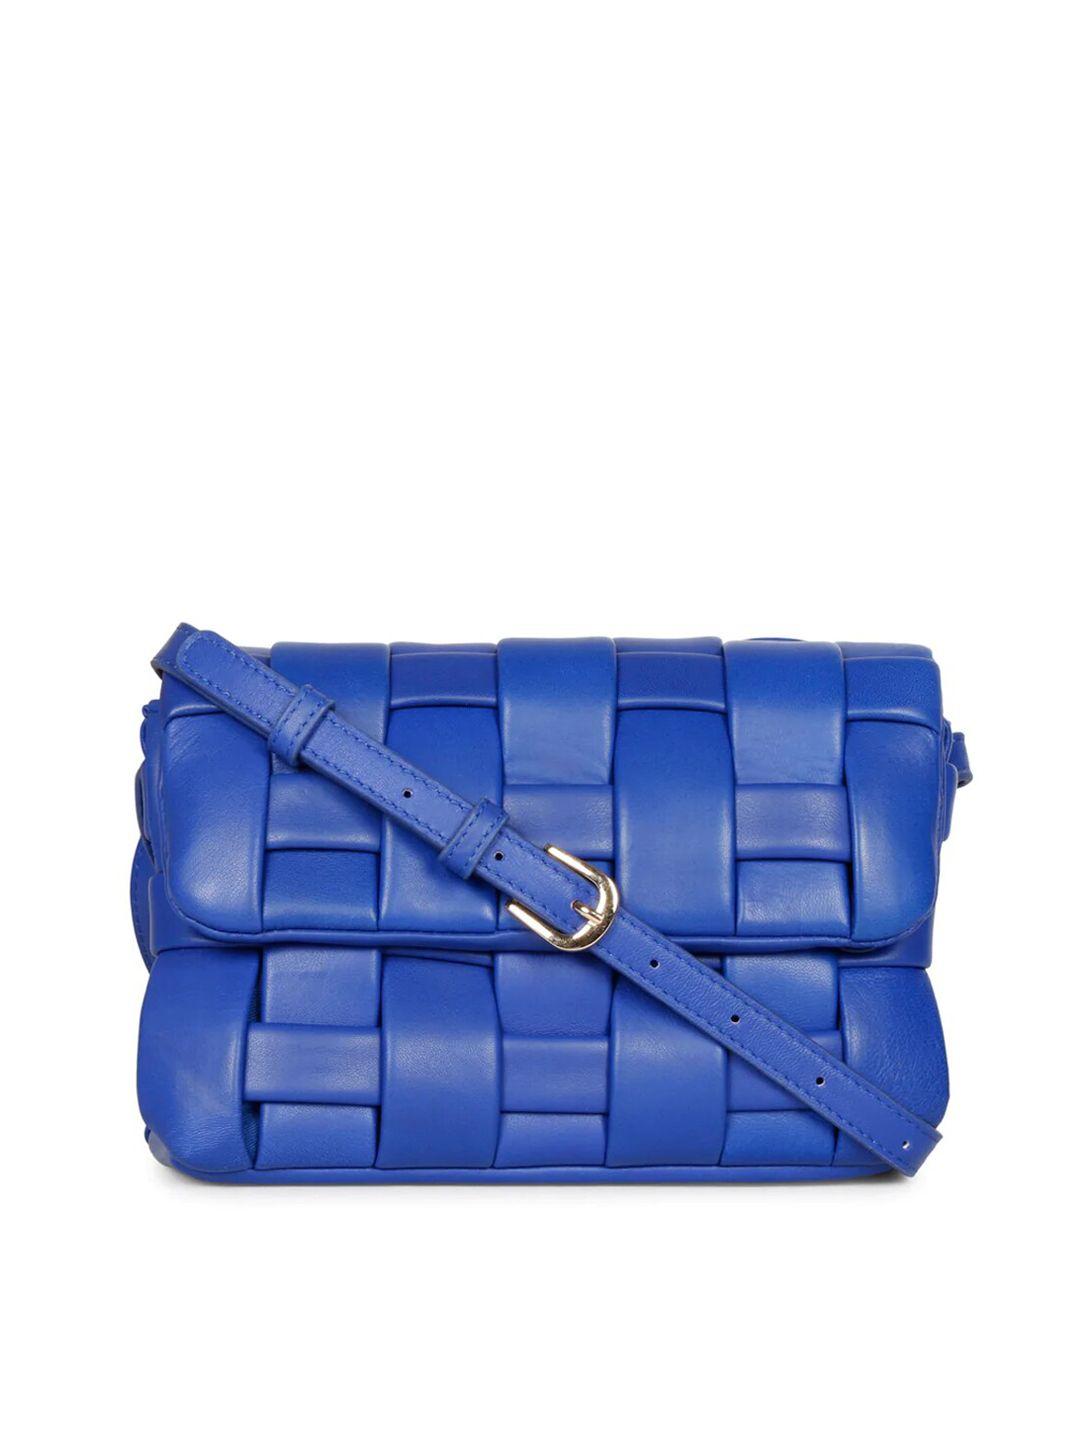 saint g leather structured sling bag with quilted